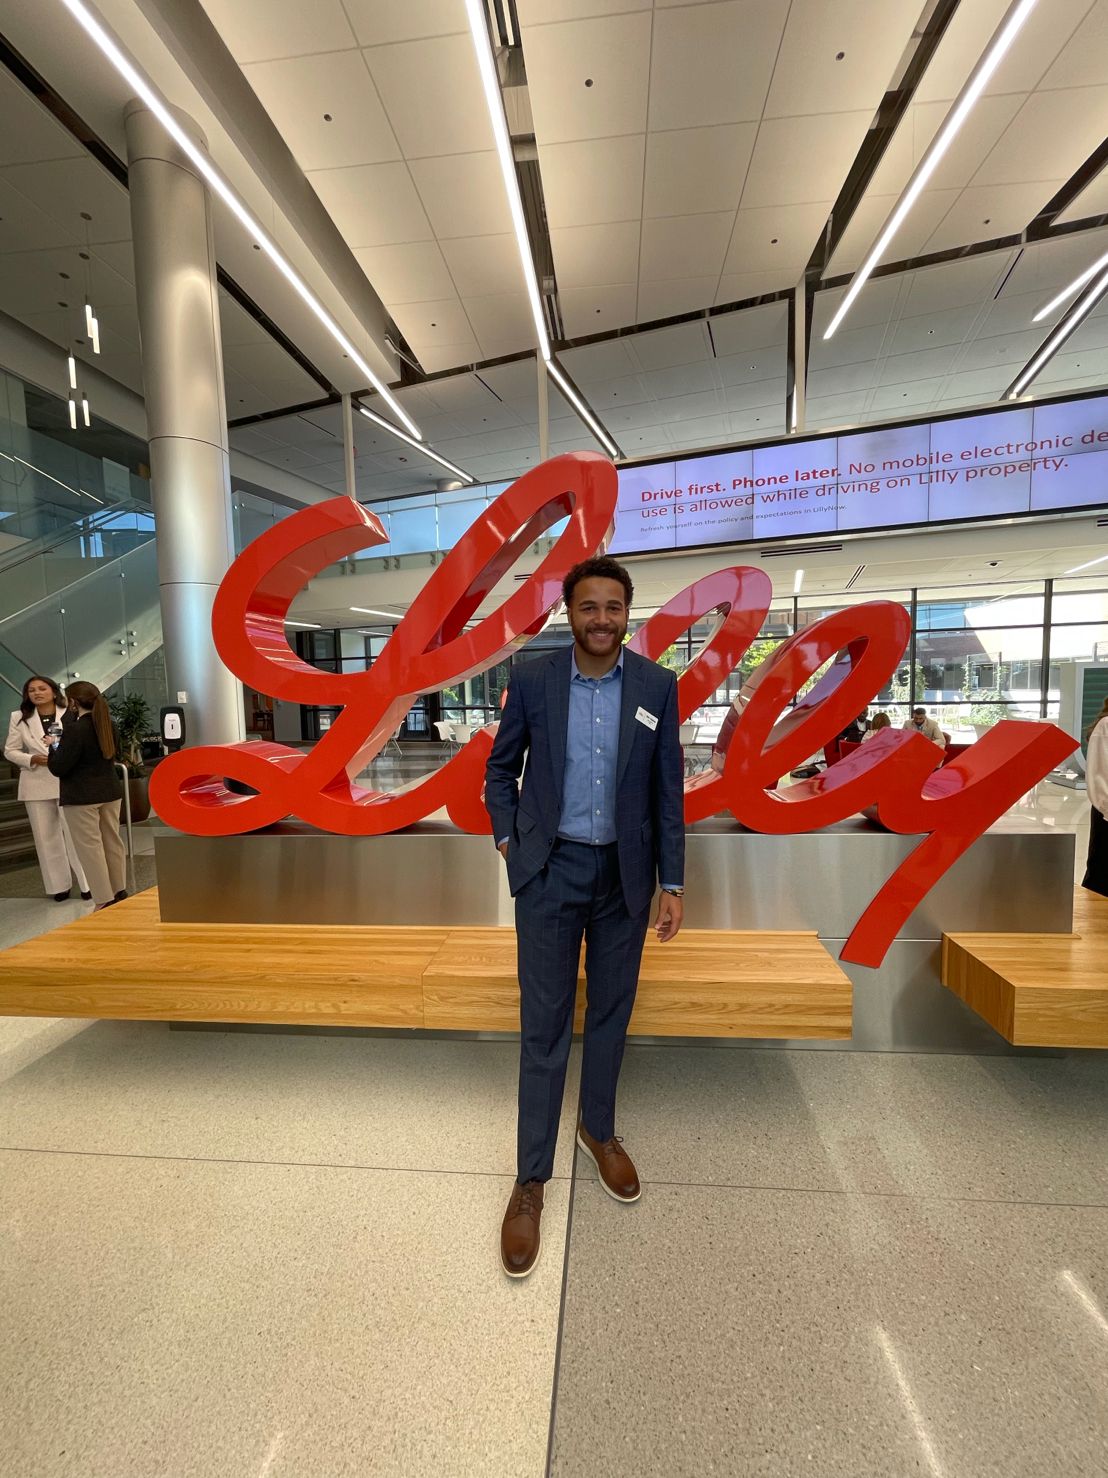 “I’m excited to announce that I’ve received and accepted a position as a Pharmaceutical Sales Representative at Eli Lilly and Company,” Thomas said. “This opportunity is truly a blessing.”